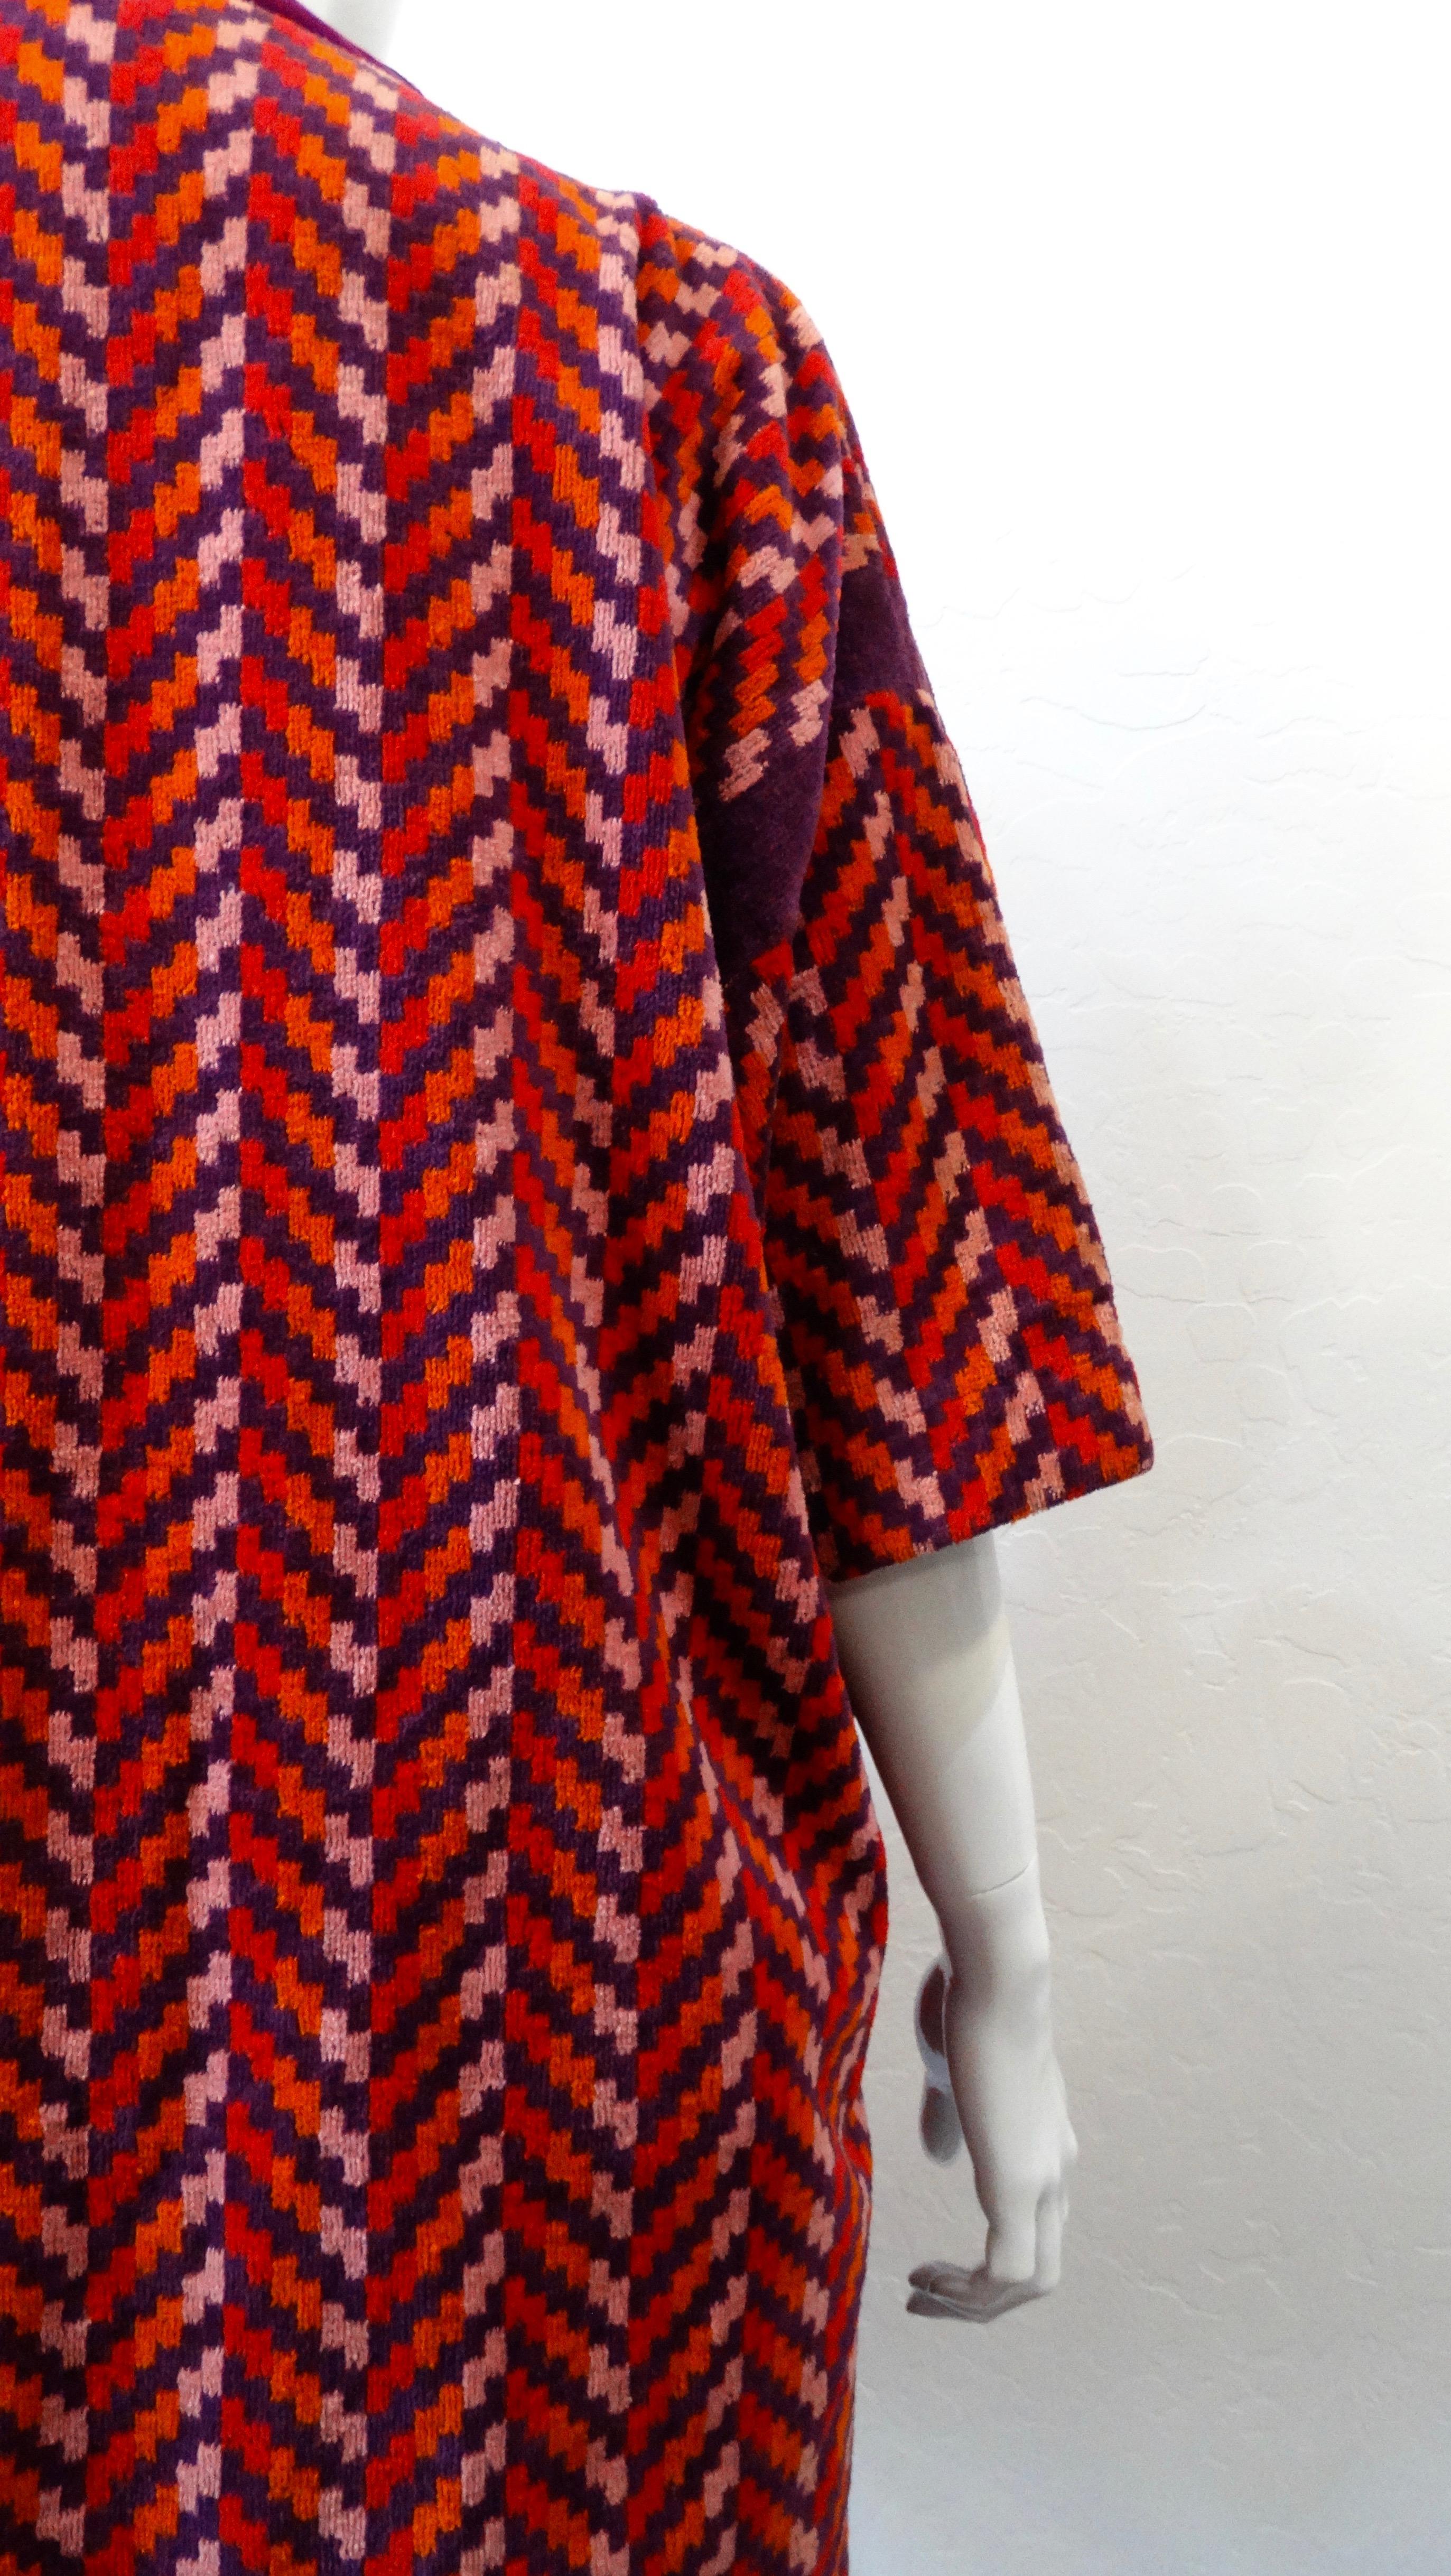 Red Yves Saint Laurent Chevron Towel Cover-Up